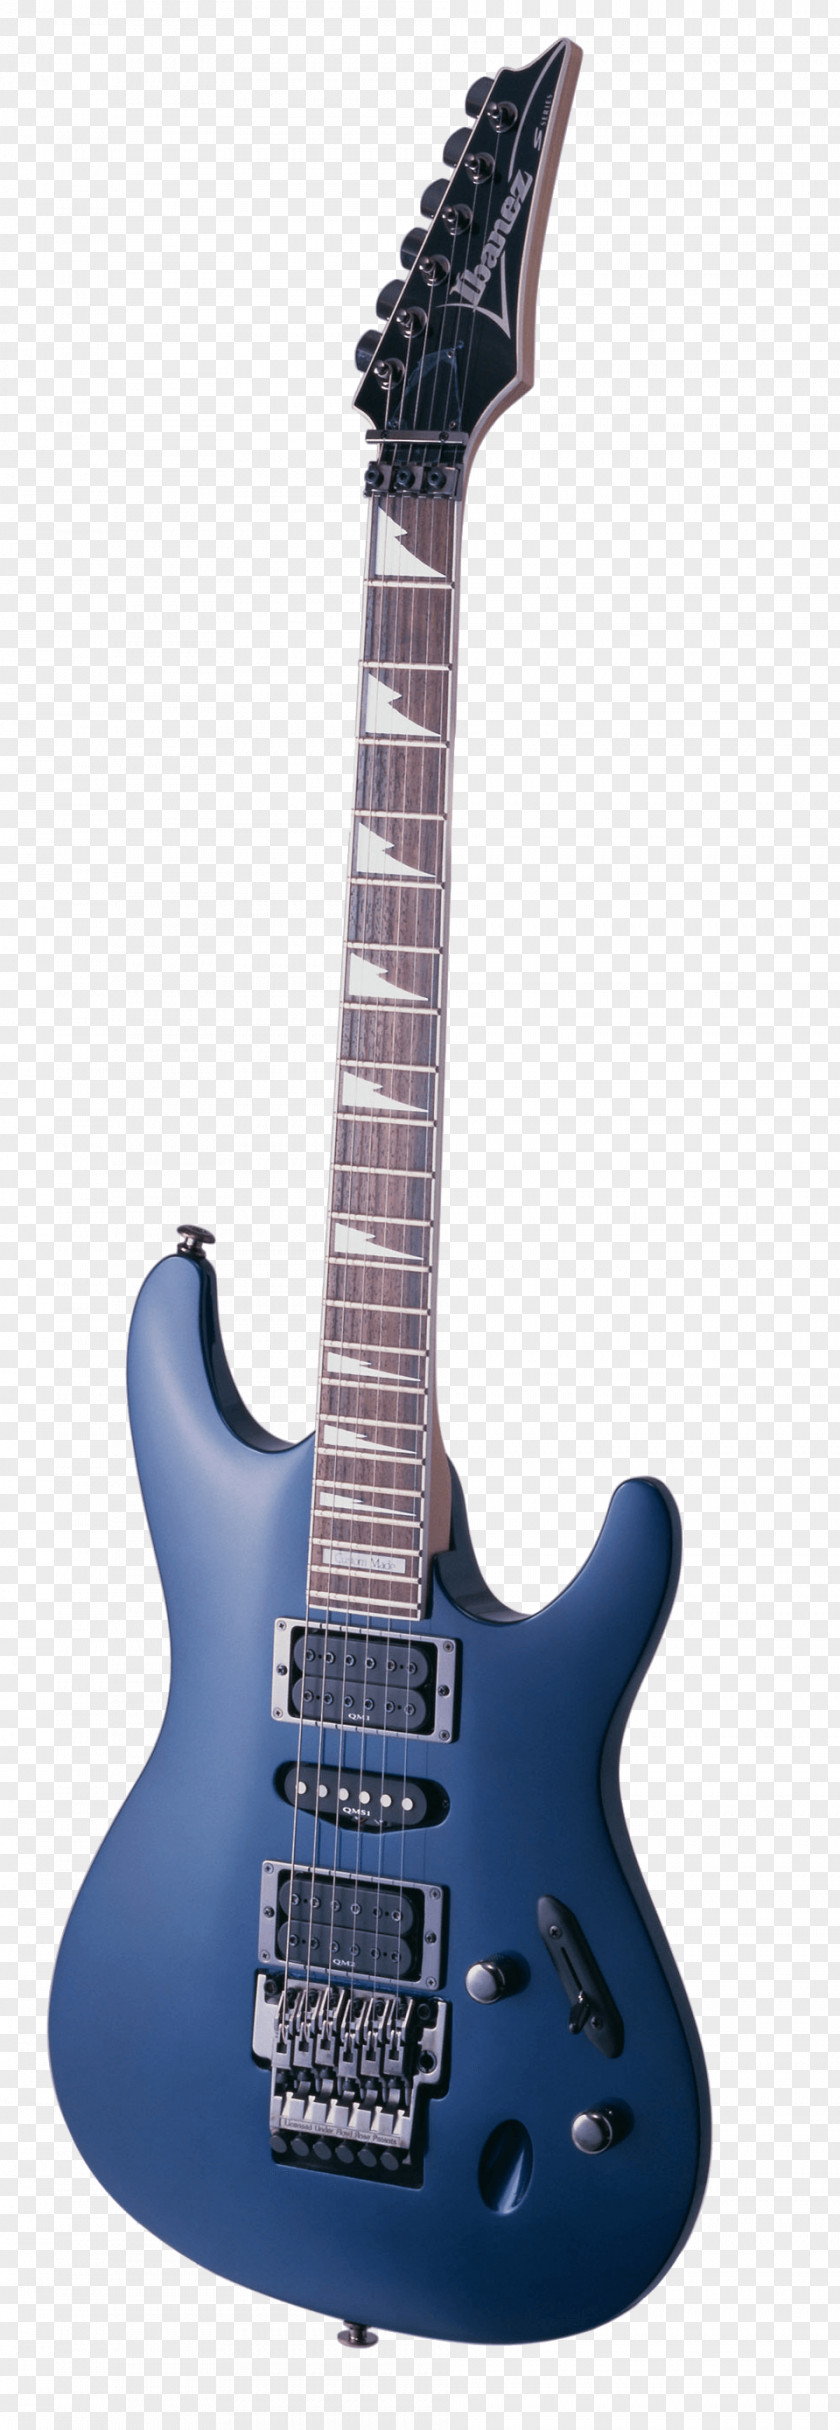 Guitar Image Icon PNG